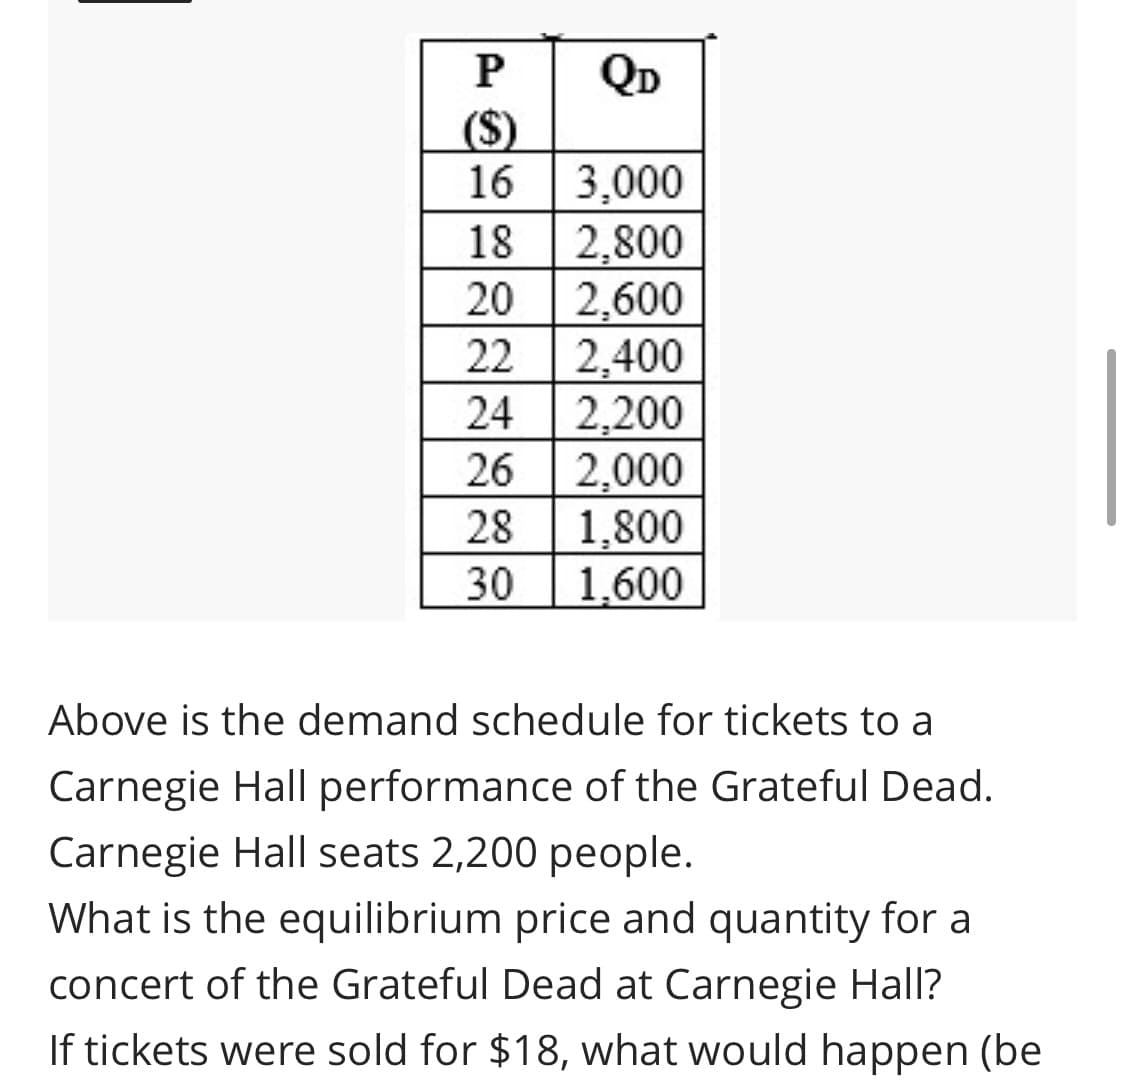 QD
($)
16 3,000
2,800
20
18
2,600
2,400
2,200
2,000
22
24
26
28
1,800
30
1,600
Above is the demand schedule for tickets to a
Carnegie Hall performance of the Grateful Dead.
Carnegie Hall seats 2,200 people.
What is the equilibrium price and quantity for a
concert of the Grateful Dead at Carnegie Hall?
If tickets were sold for $18, what would happen (be
